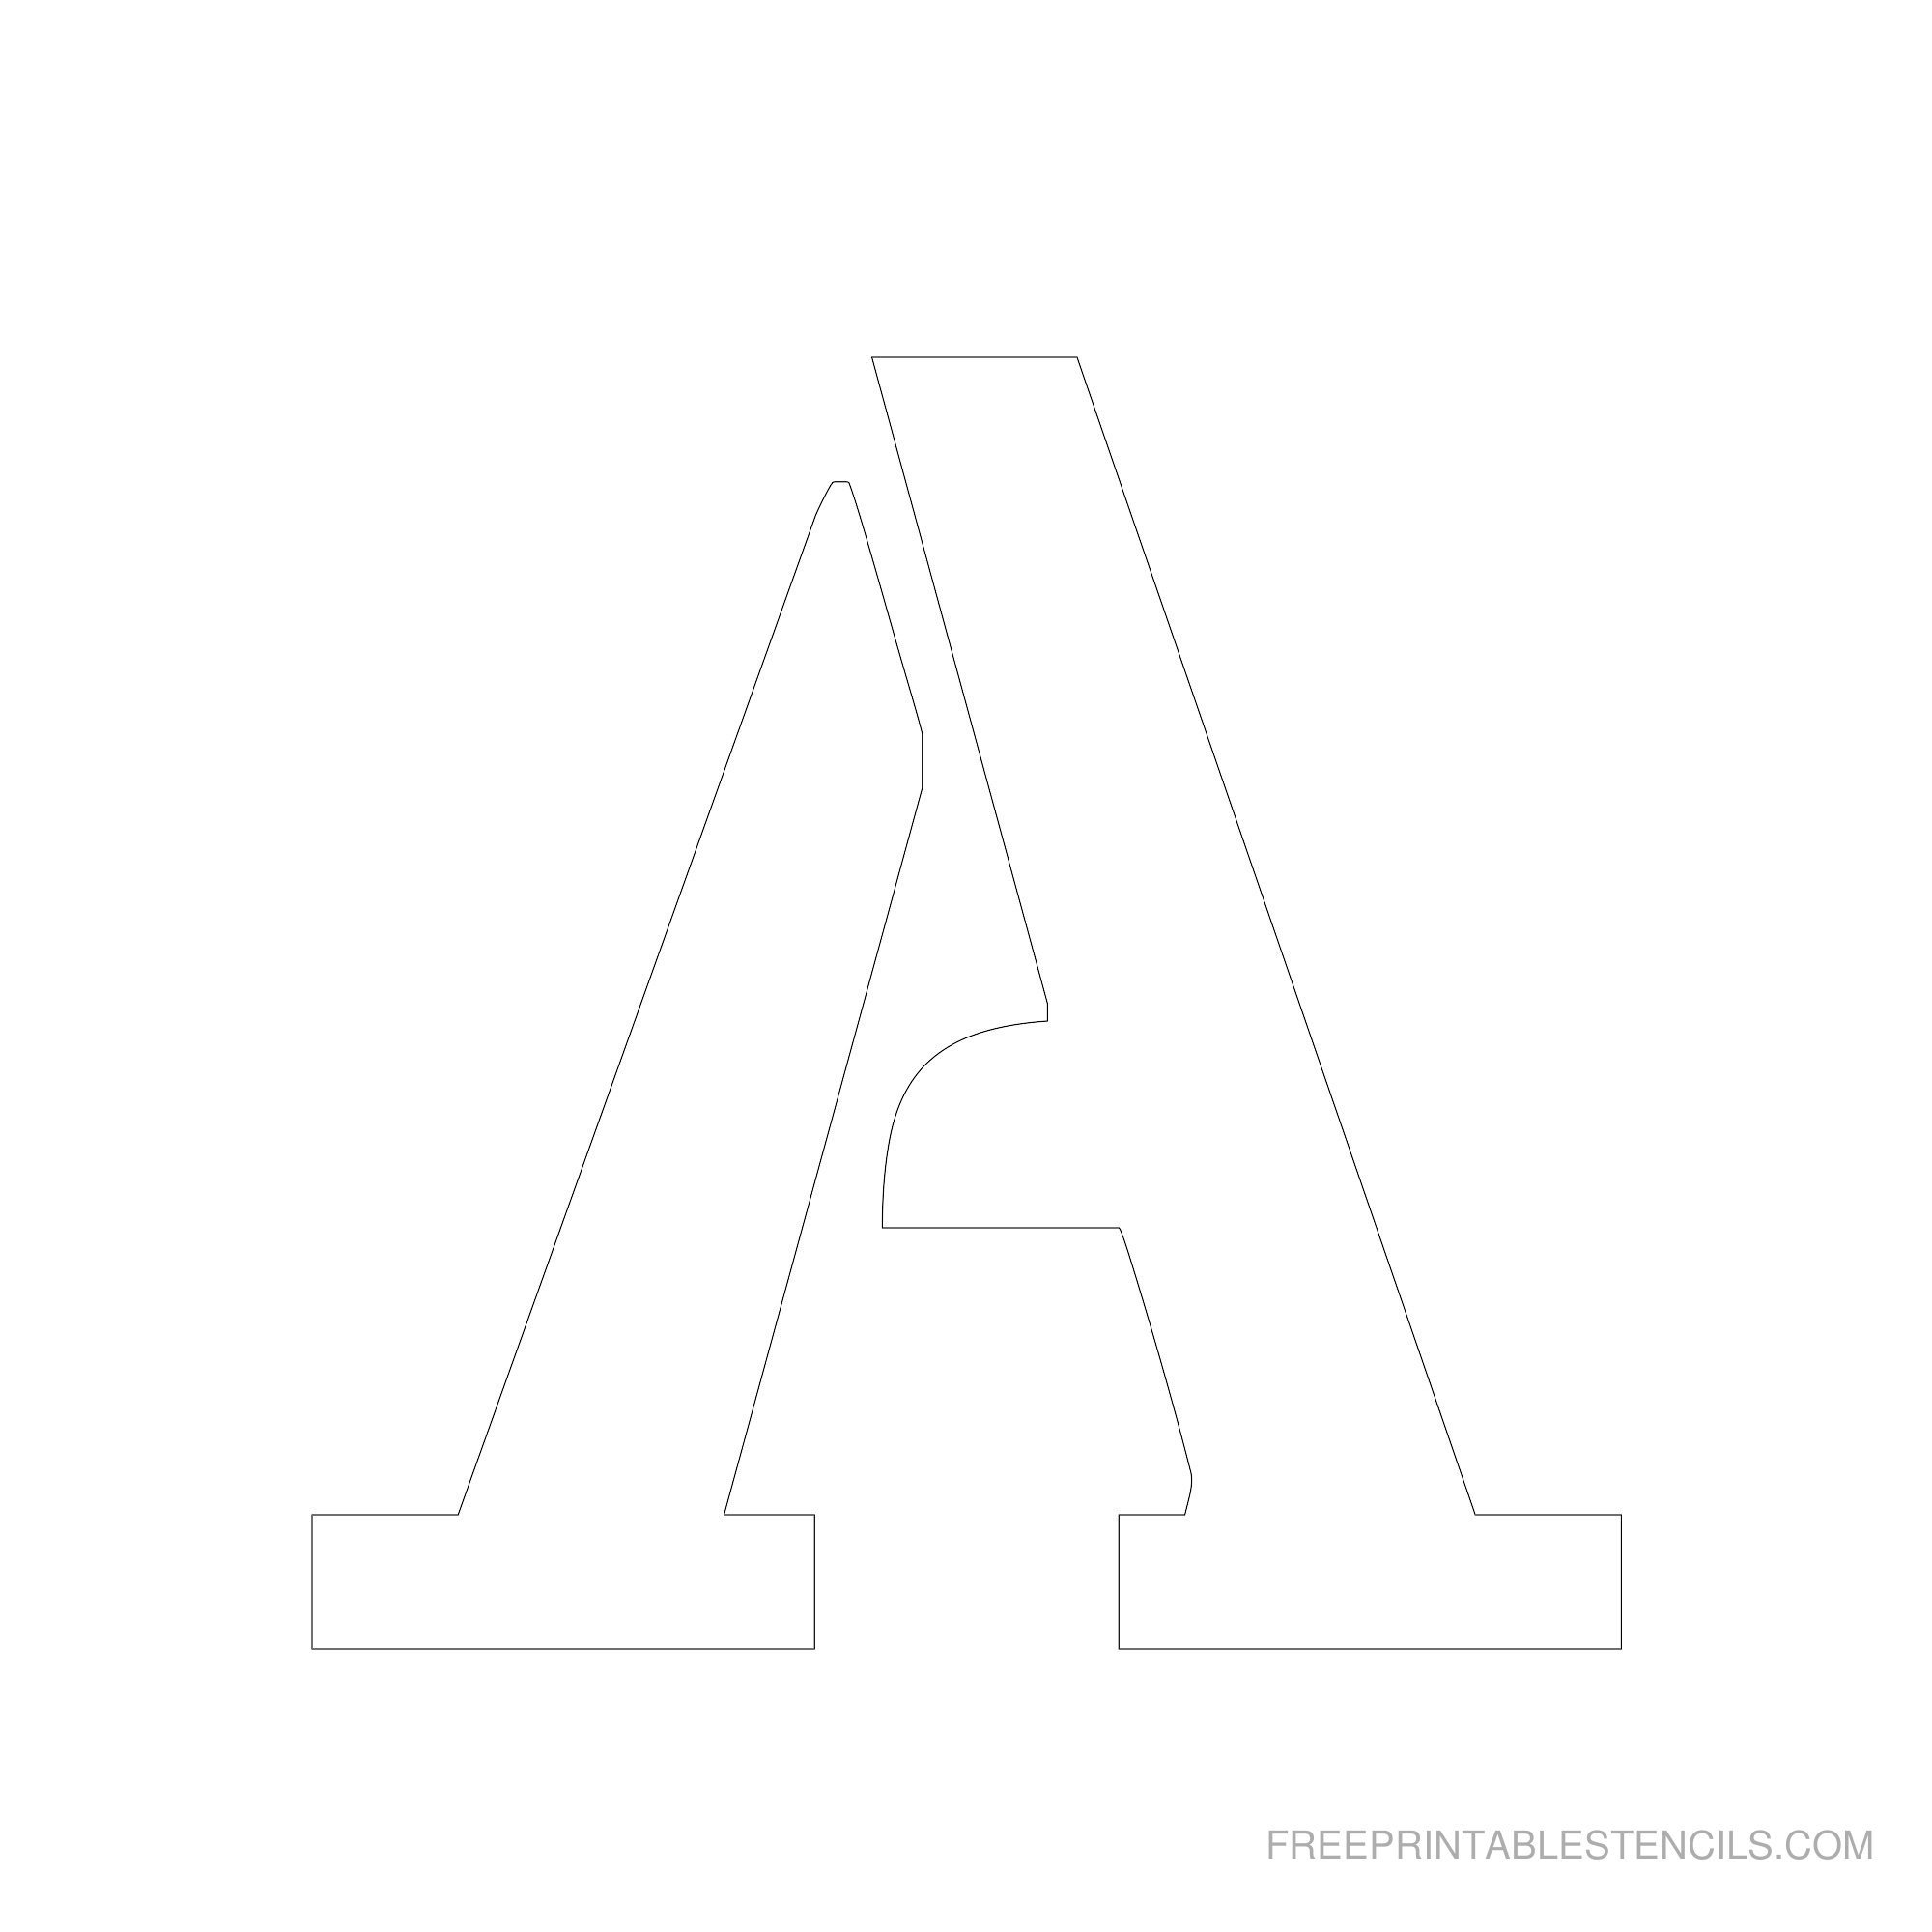 Printable 6 Inch Letter Stencils A-Z | Free Printable Stencils - Free Printable Letters Az